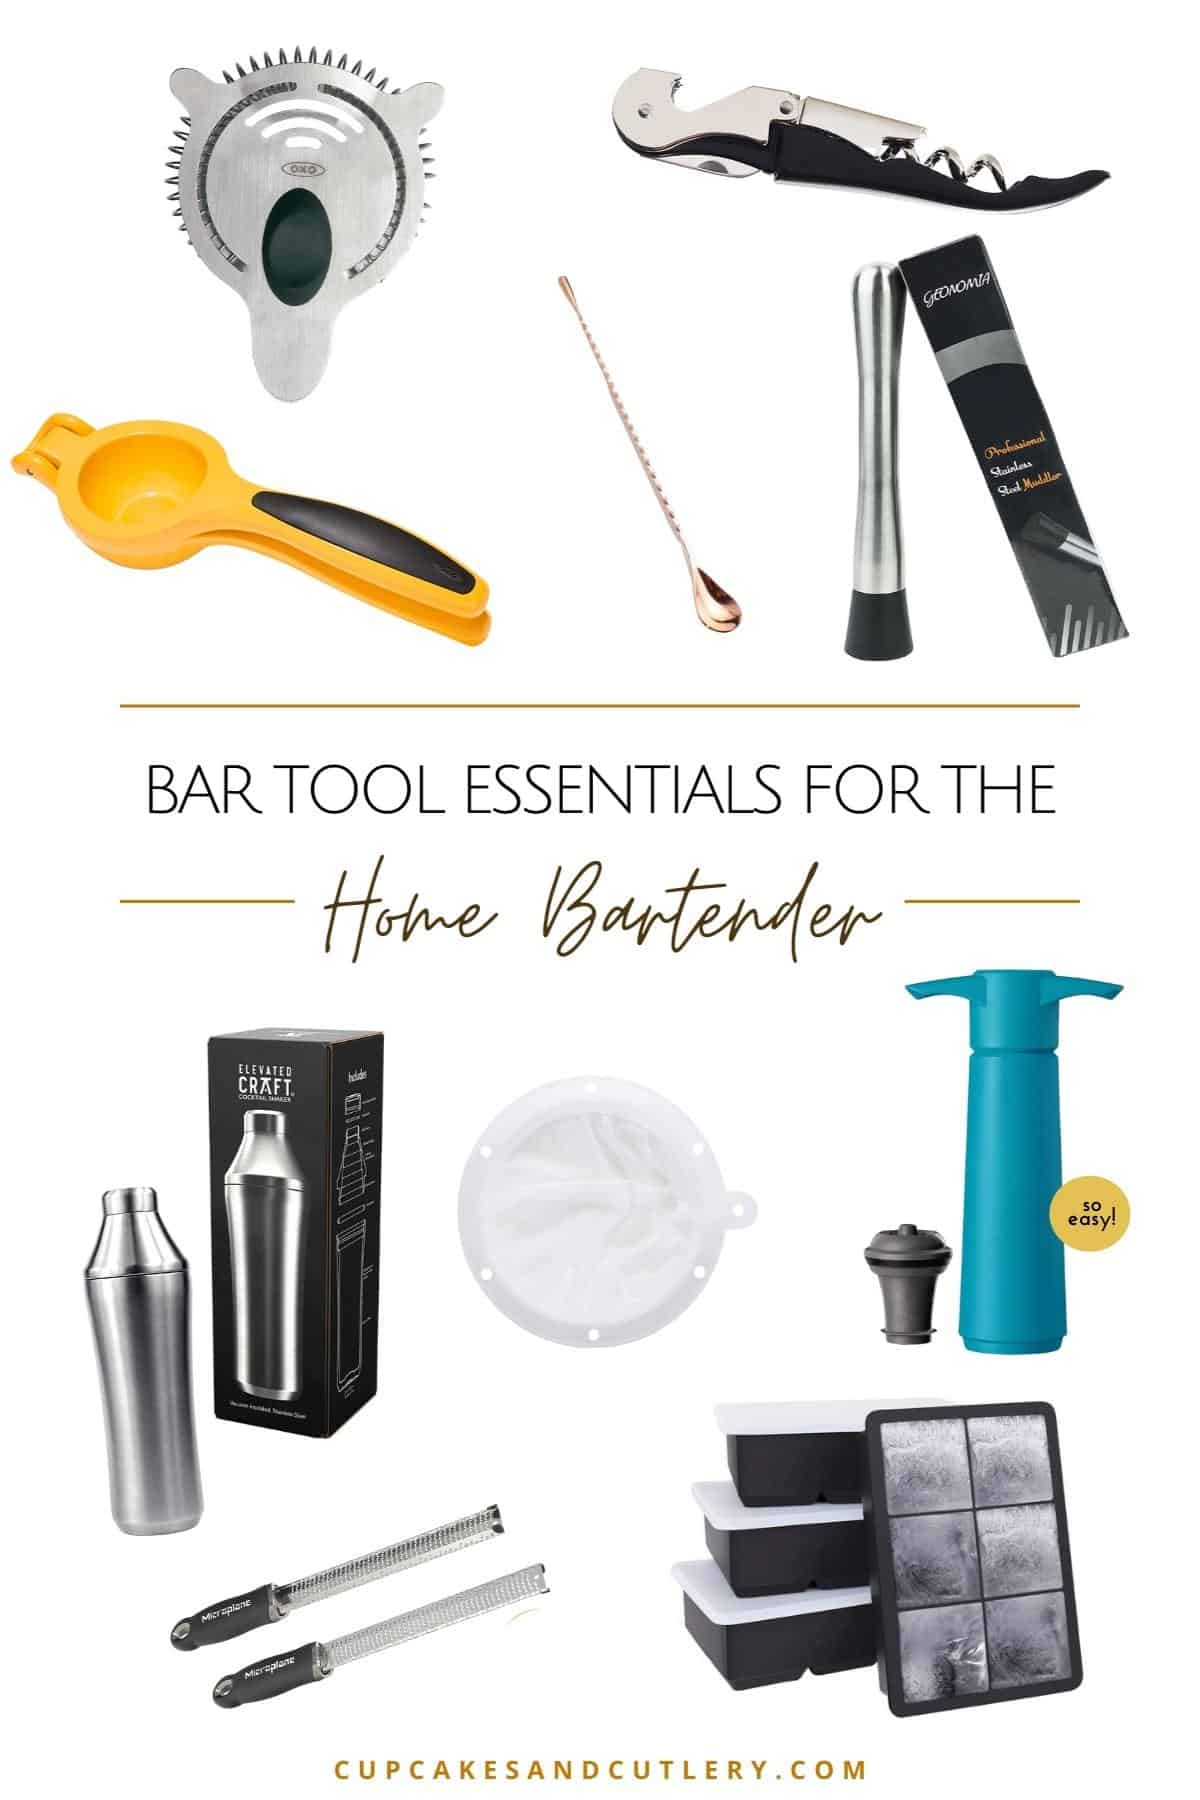 https://www.cupcakesandcutlery.com/wp-content/uploads/2022/01/must-have-bar-tools-for-the-home-bartender.jpg